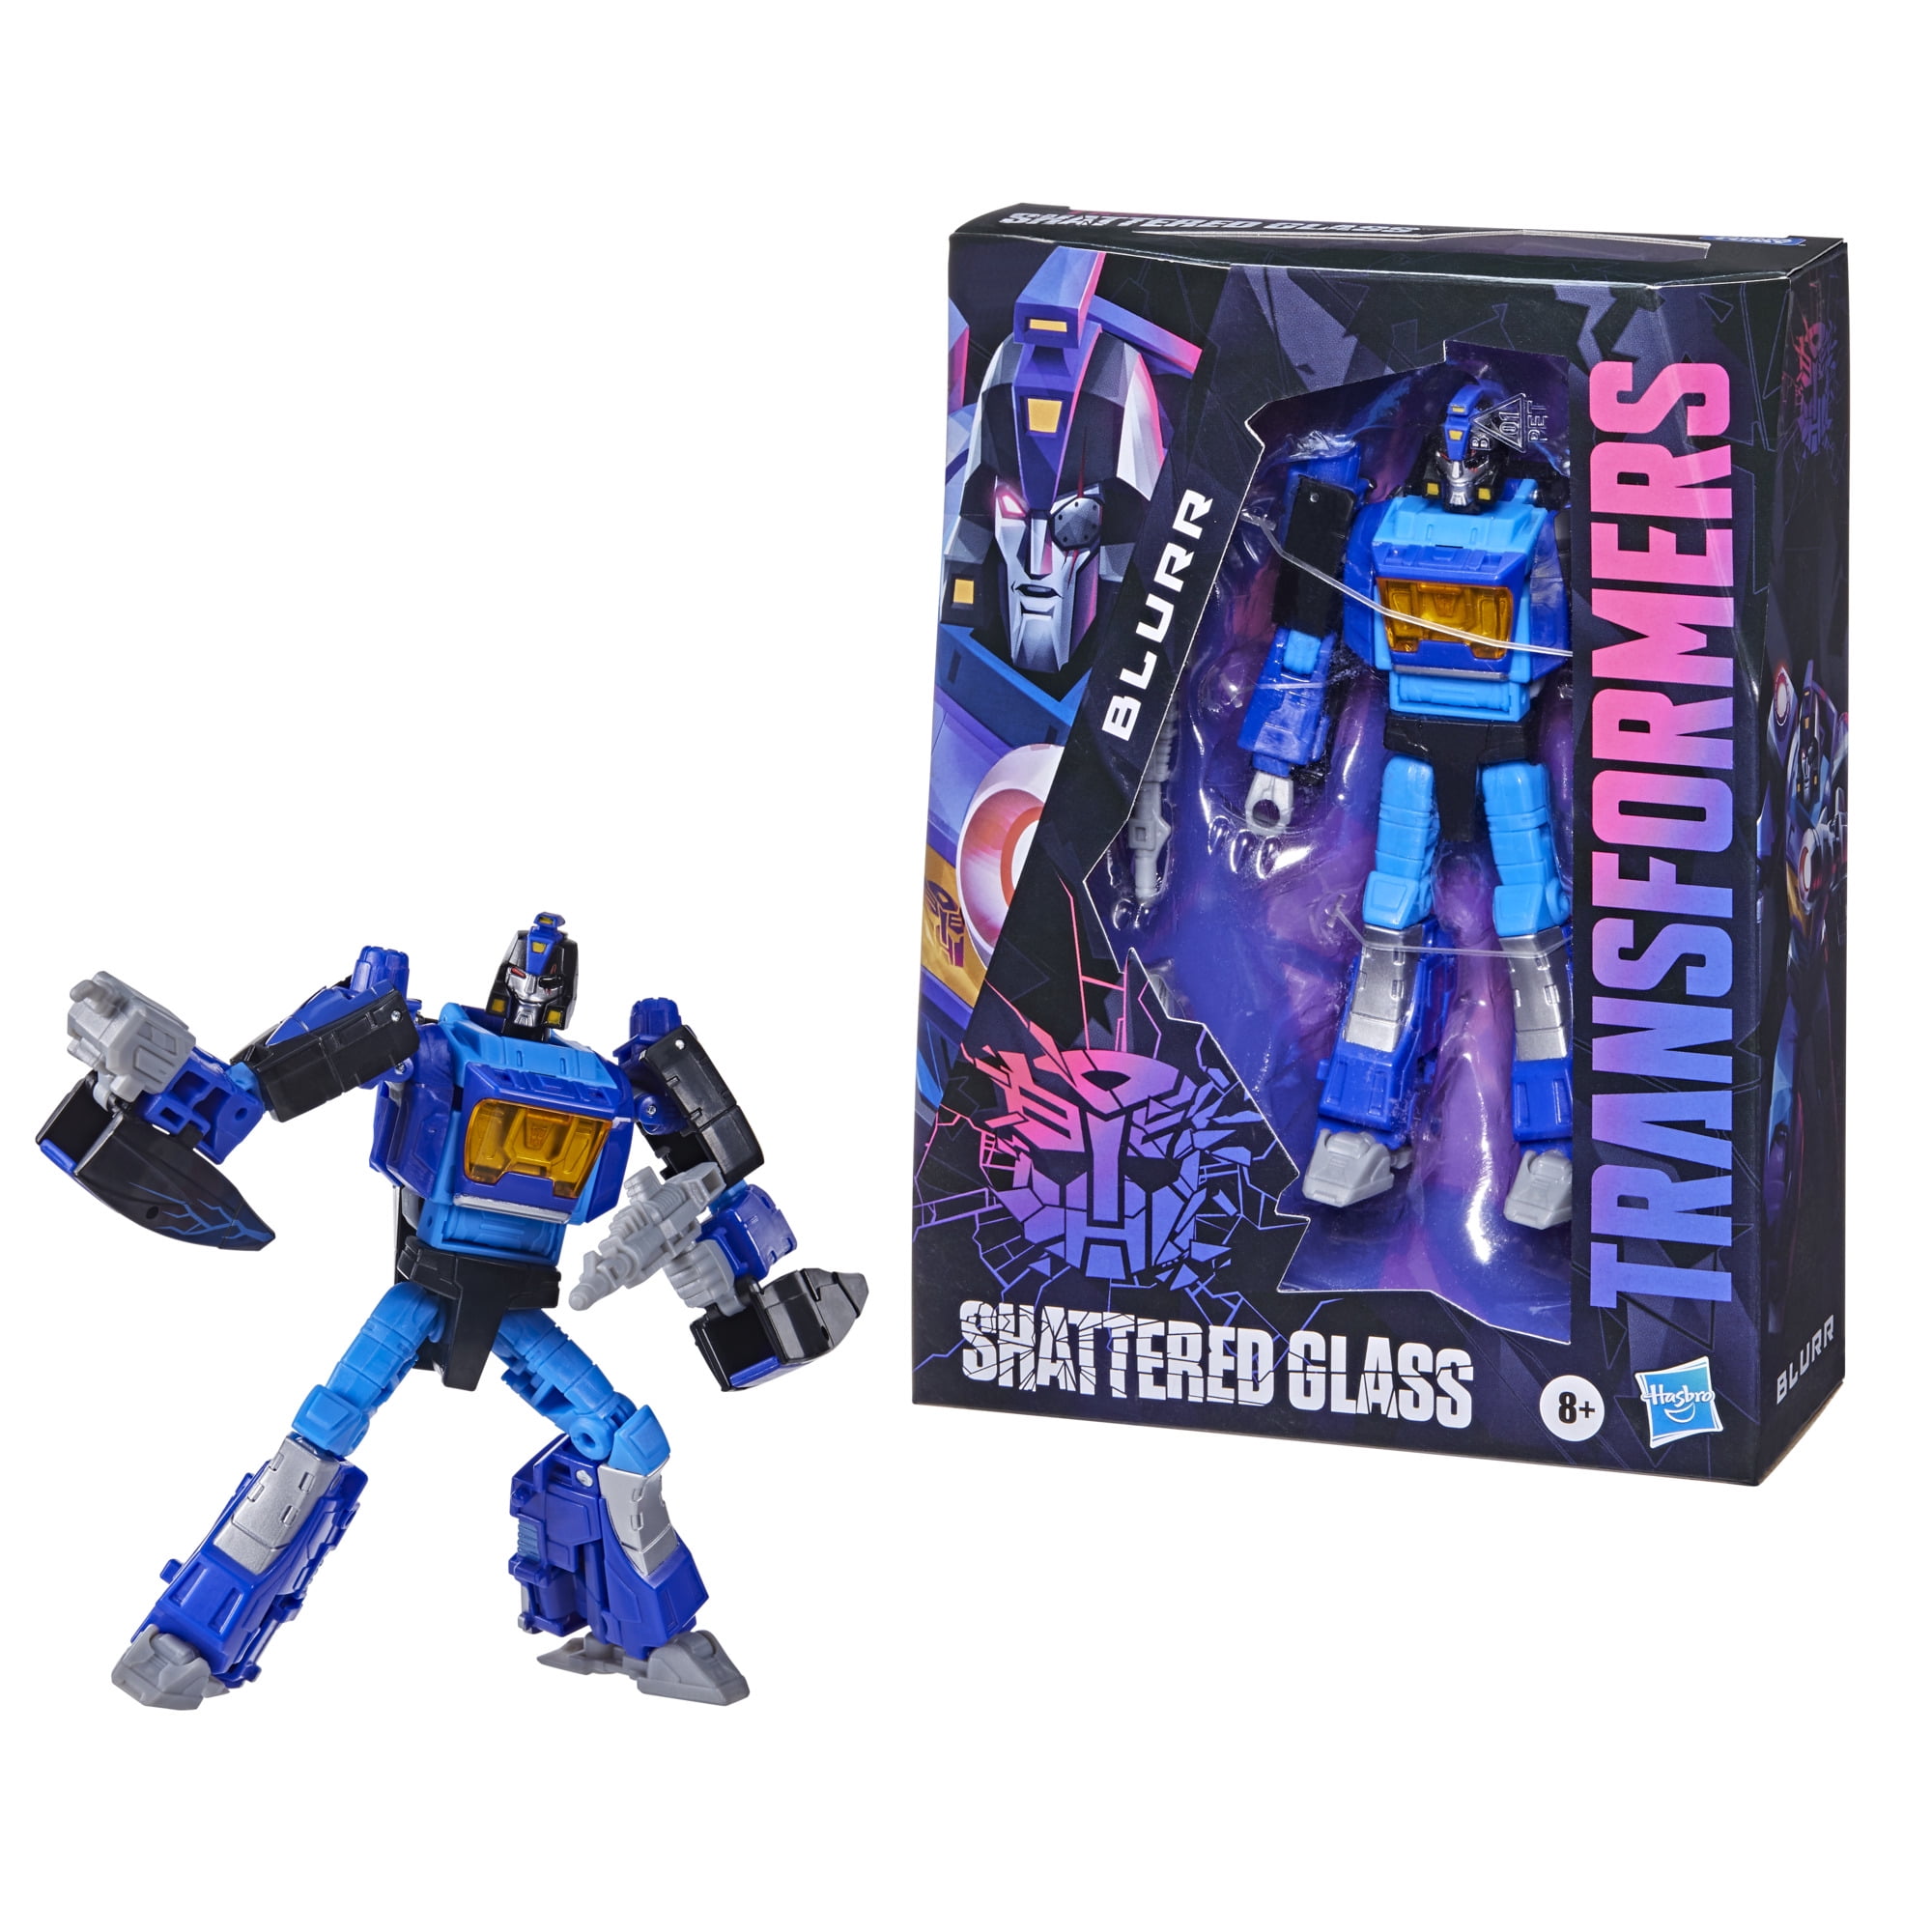 Transformers Generations Shattered Glass Collection Deluxe Class Blurr -  Ages 8 and Up, 5.5-inch